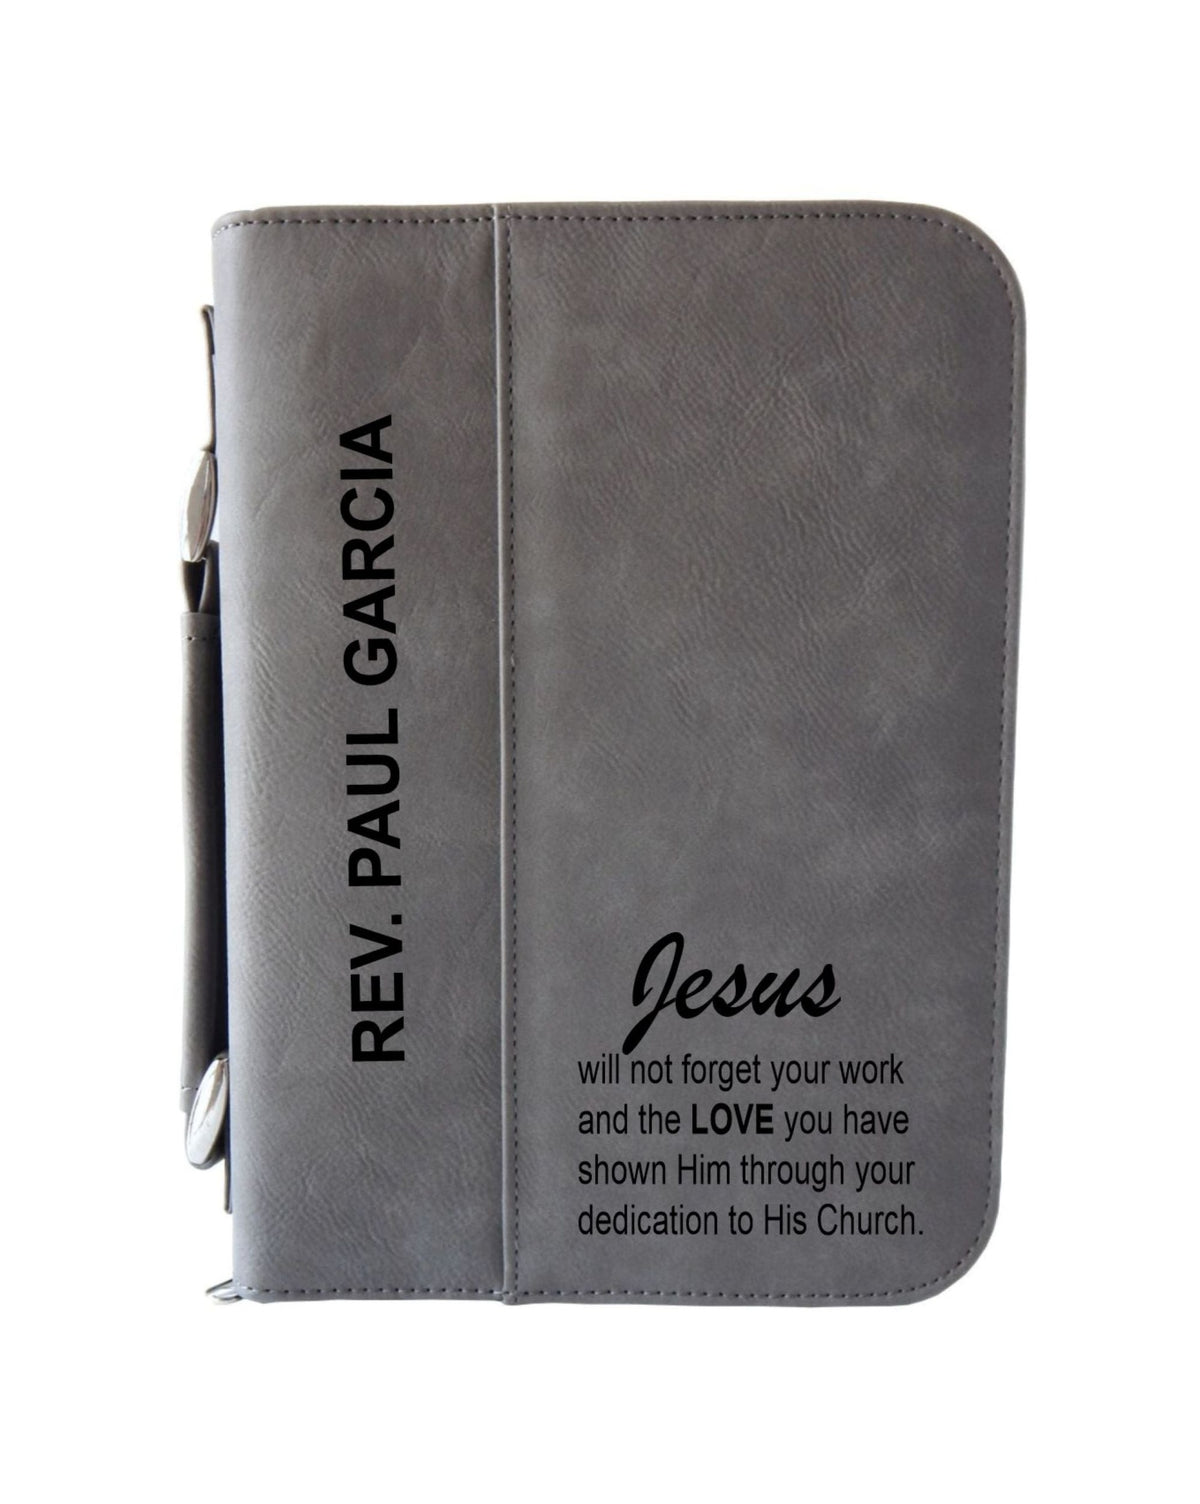 Catholic Priest Ordination Gift | Personalized Engraved Bible Cover BCL040